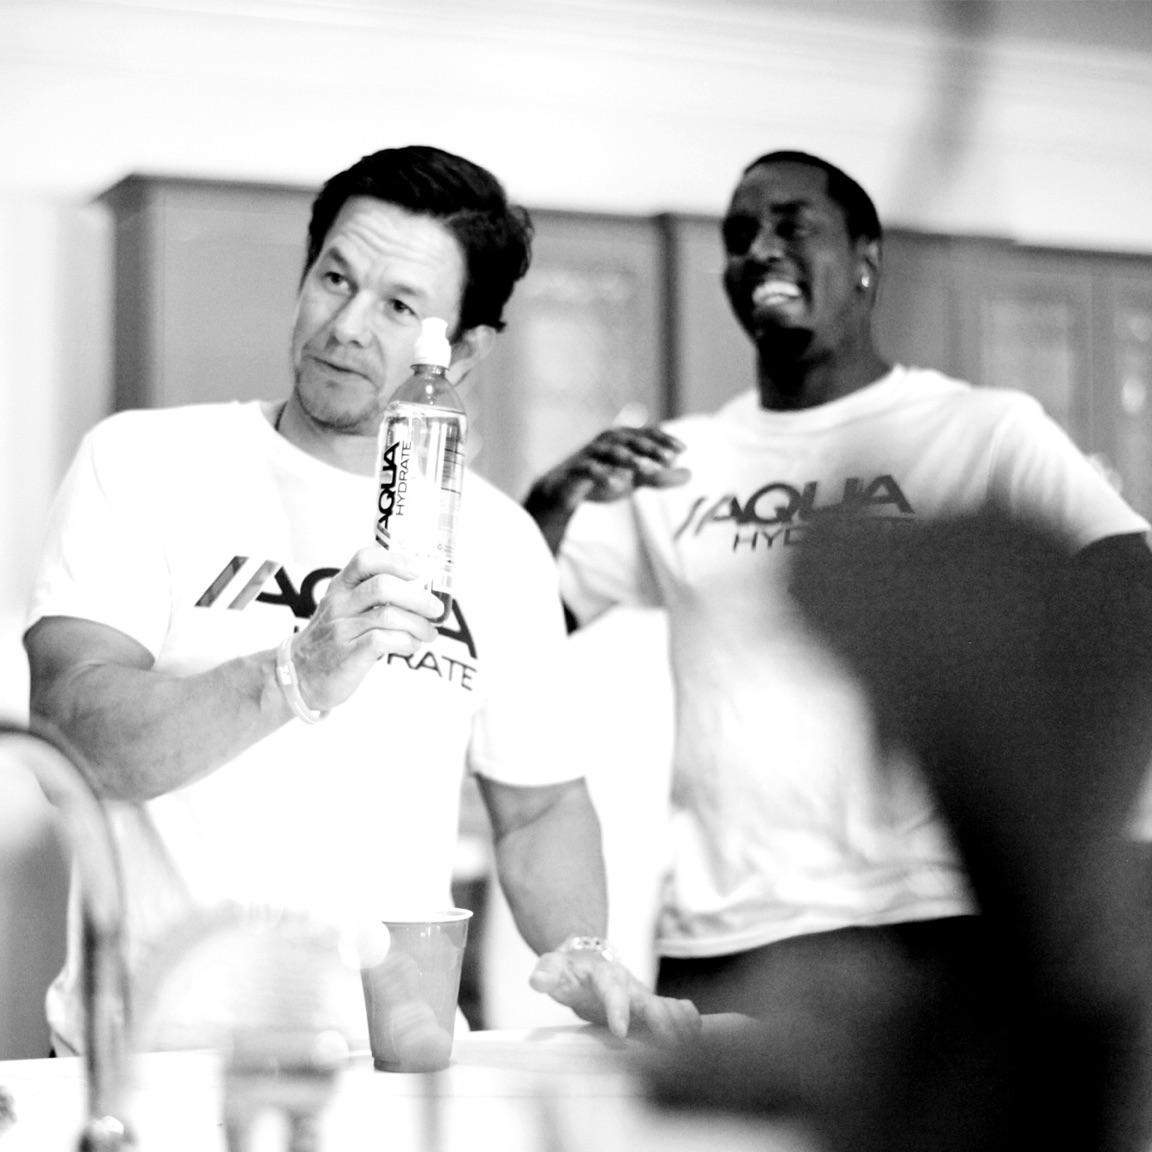 Just wanted to wish my good friend @mark_wahlberg happy
birthday!! Live it up and here's to many more!!! https://t.co/fWfMsfer2w